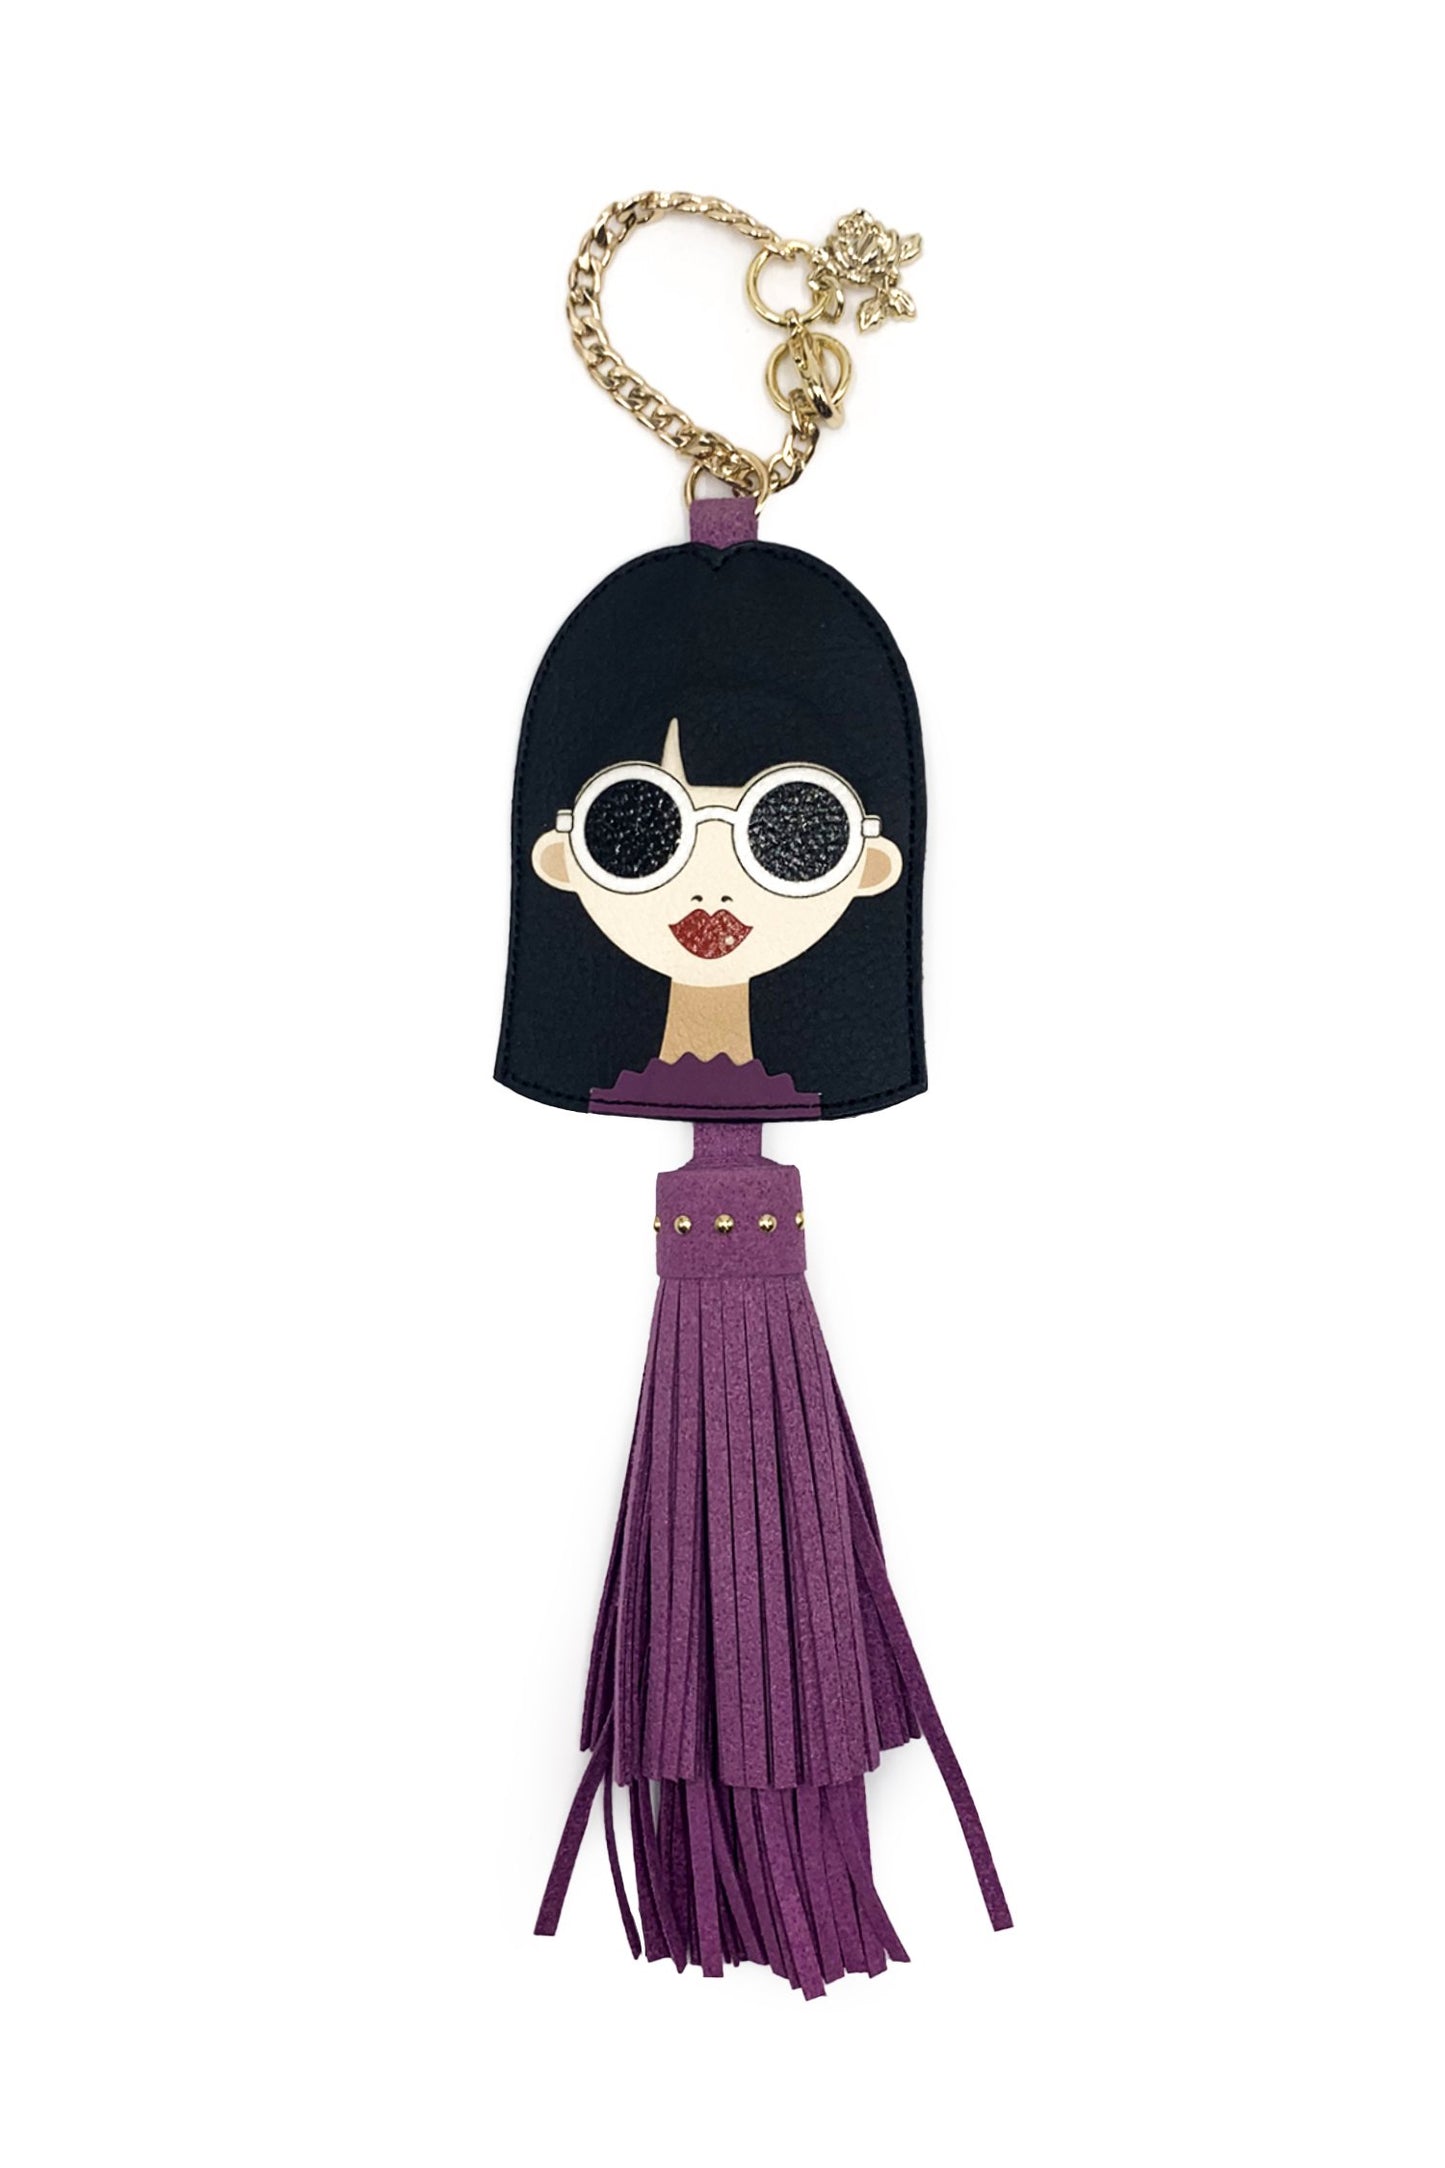 Face Charm, Golden chain, pretty face, black hair, glasses, red lipstick, small purple leather strips body